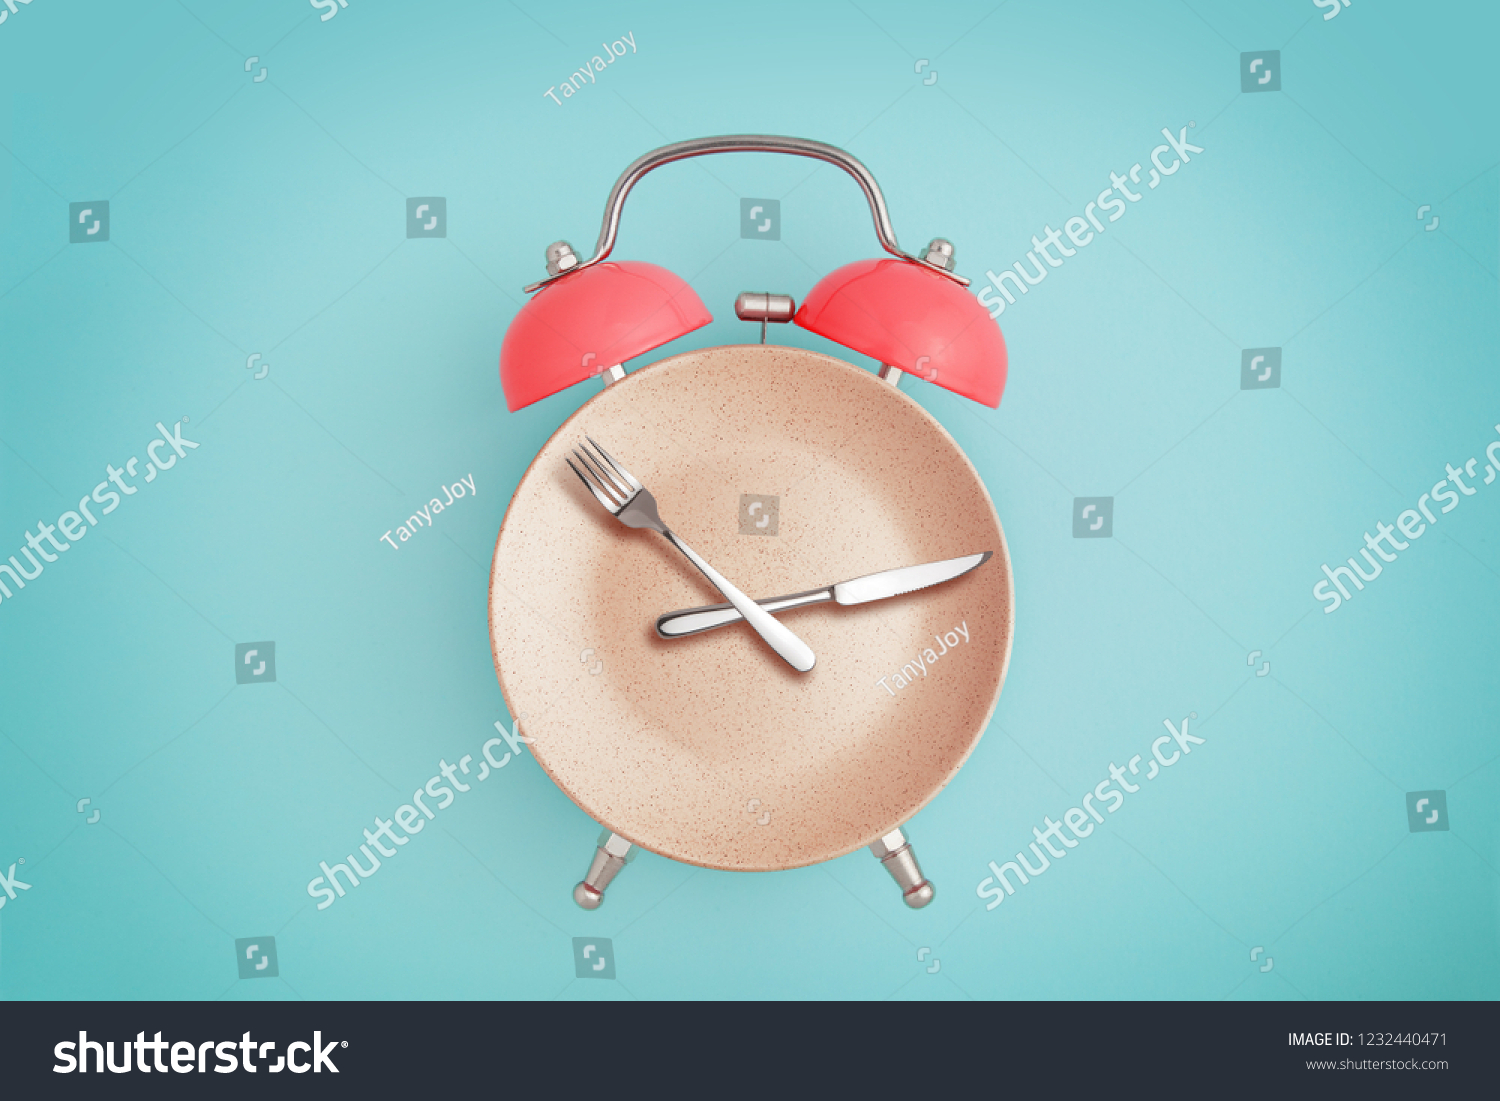 Alarm clock and plate with cutlery . Concept of intermittent fasting, lunchtime, diet and weight loss #1232440471